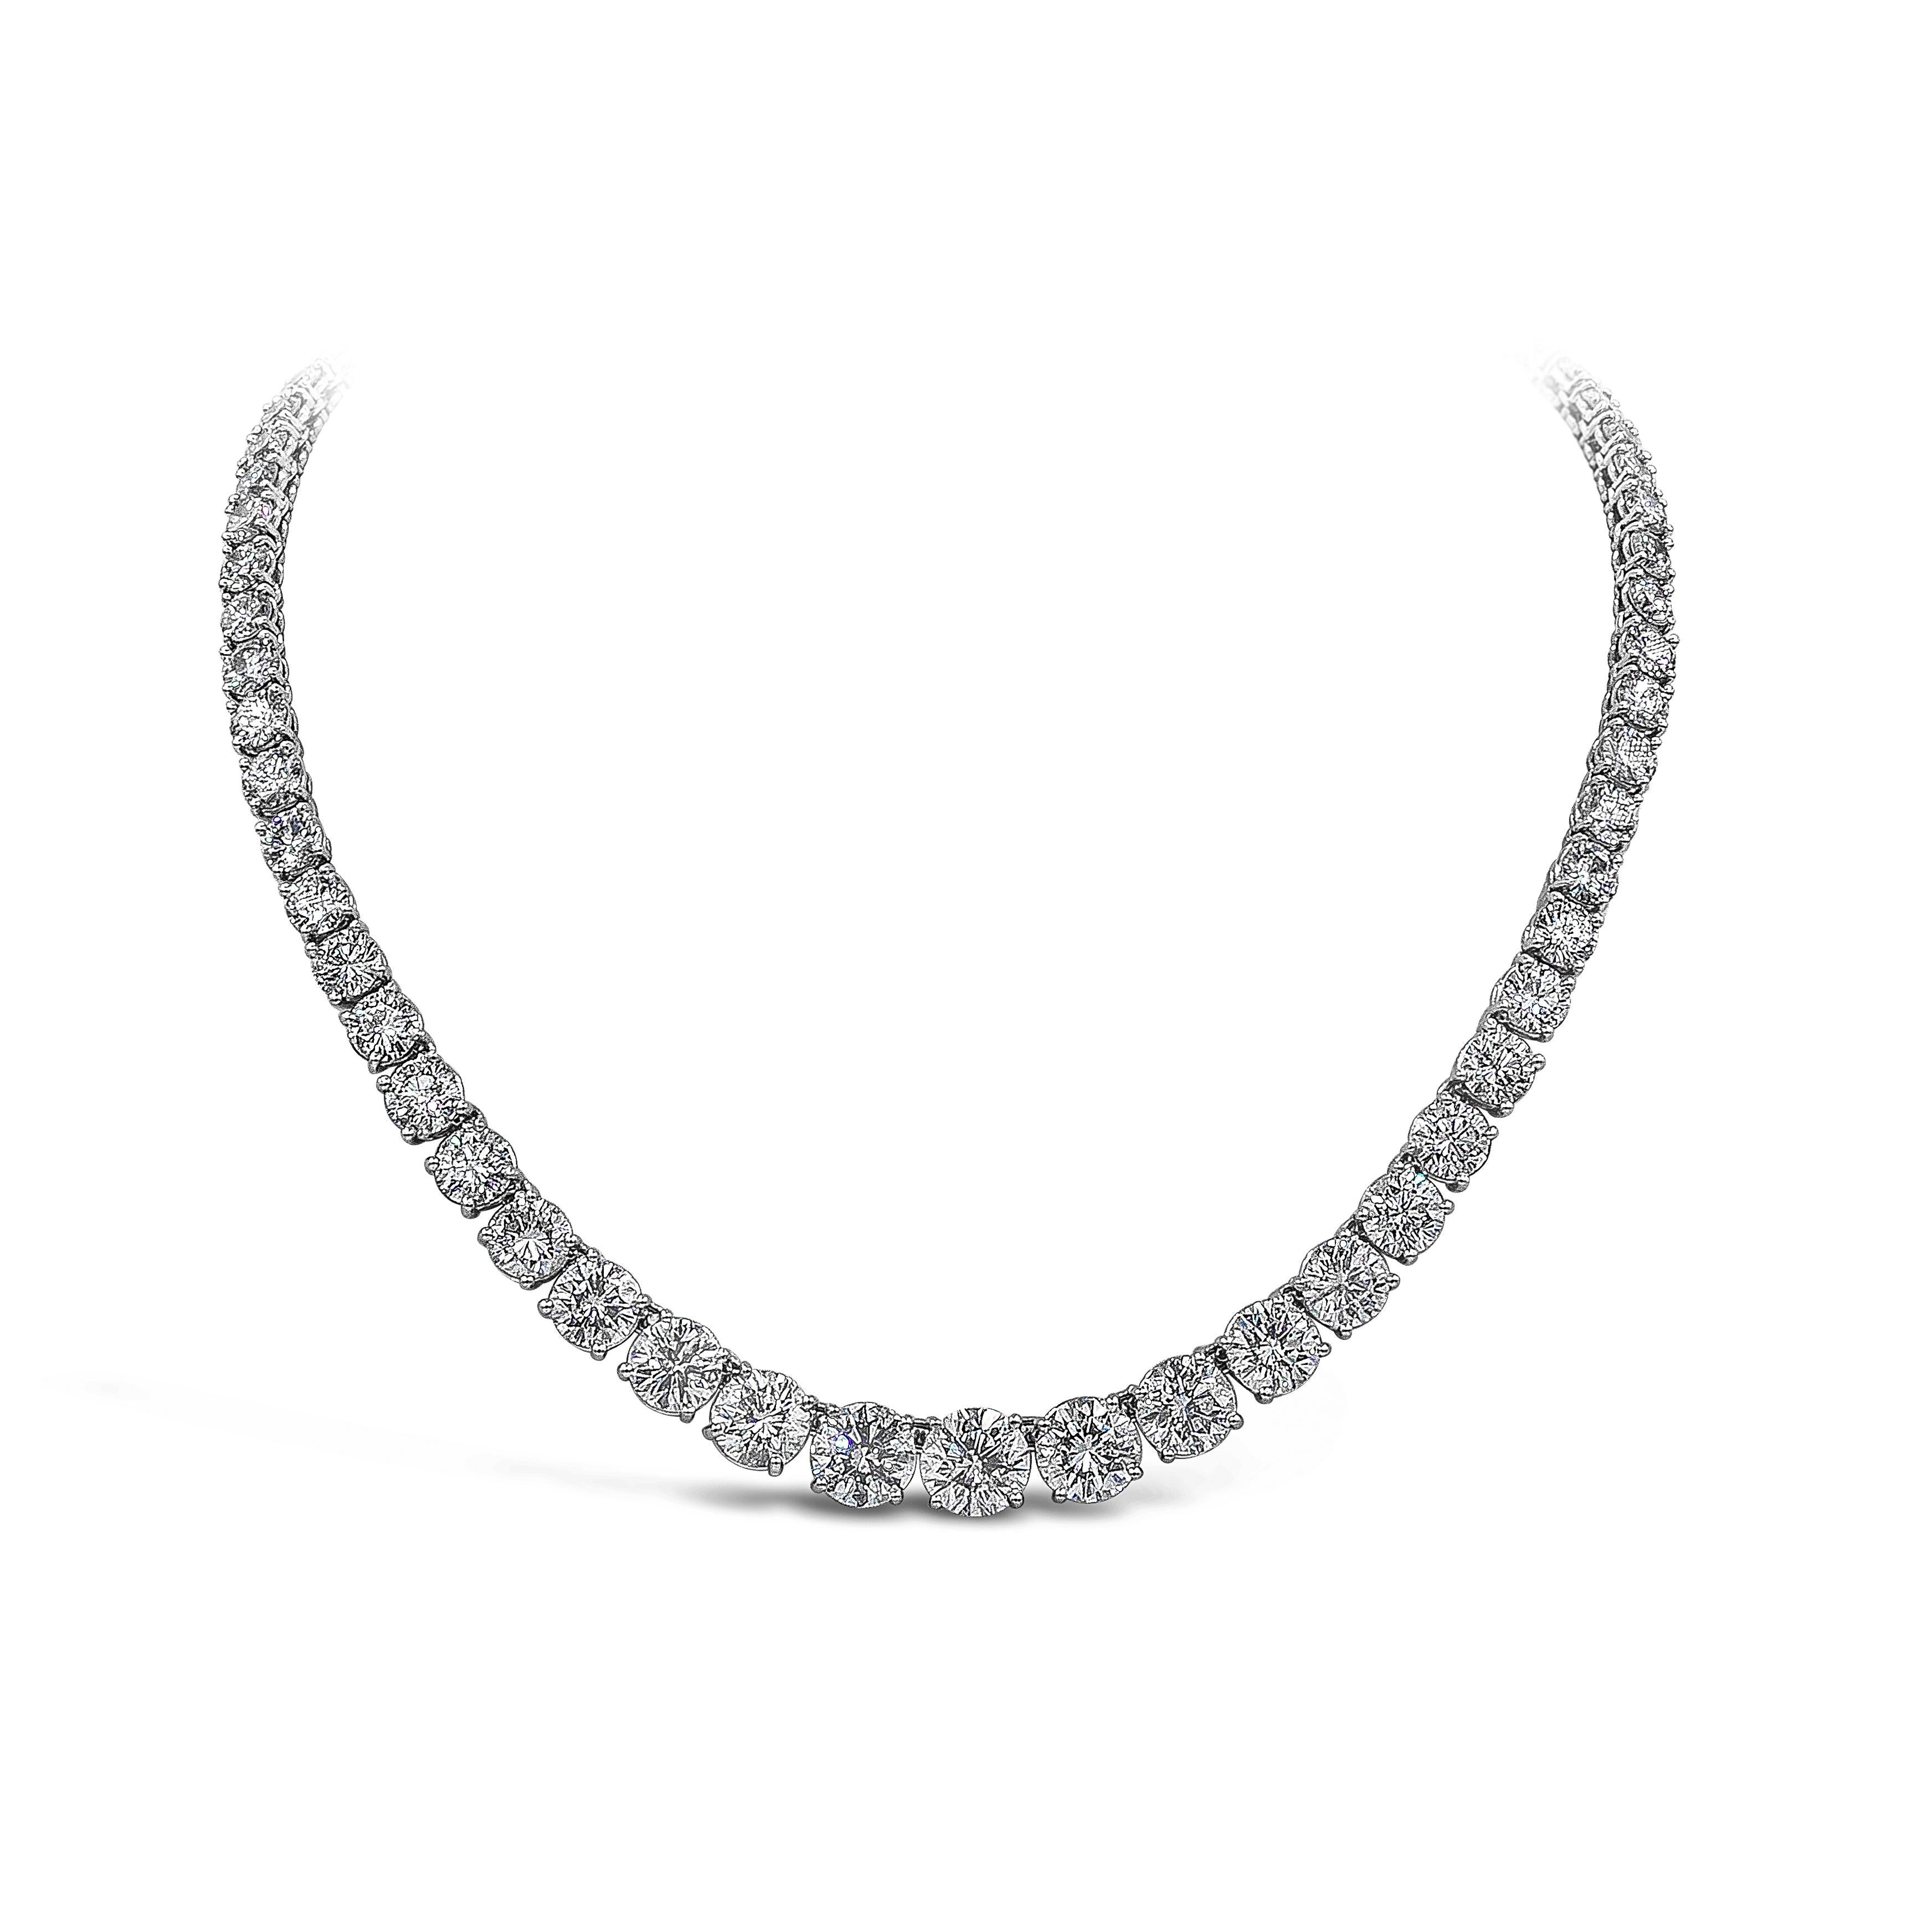 An important and brilliant riviere tennis necklace showcasing graduating 69 pieces of brilliant round diamonds from center to end weighing 51.59 carats total, approximately F-G Color and I1 in Clarity. The largest middle diamond is 2.90 Carats and